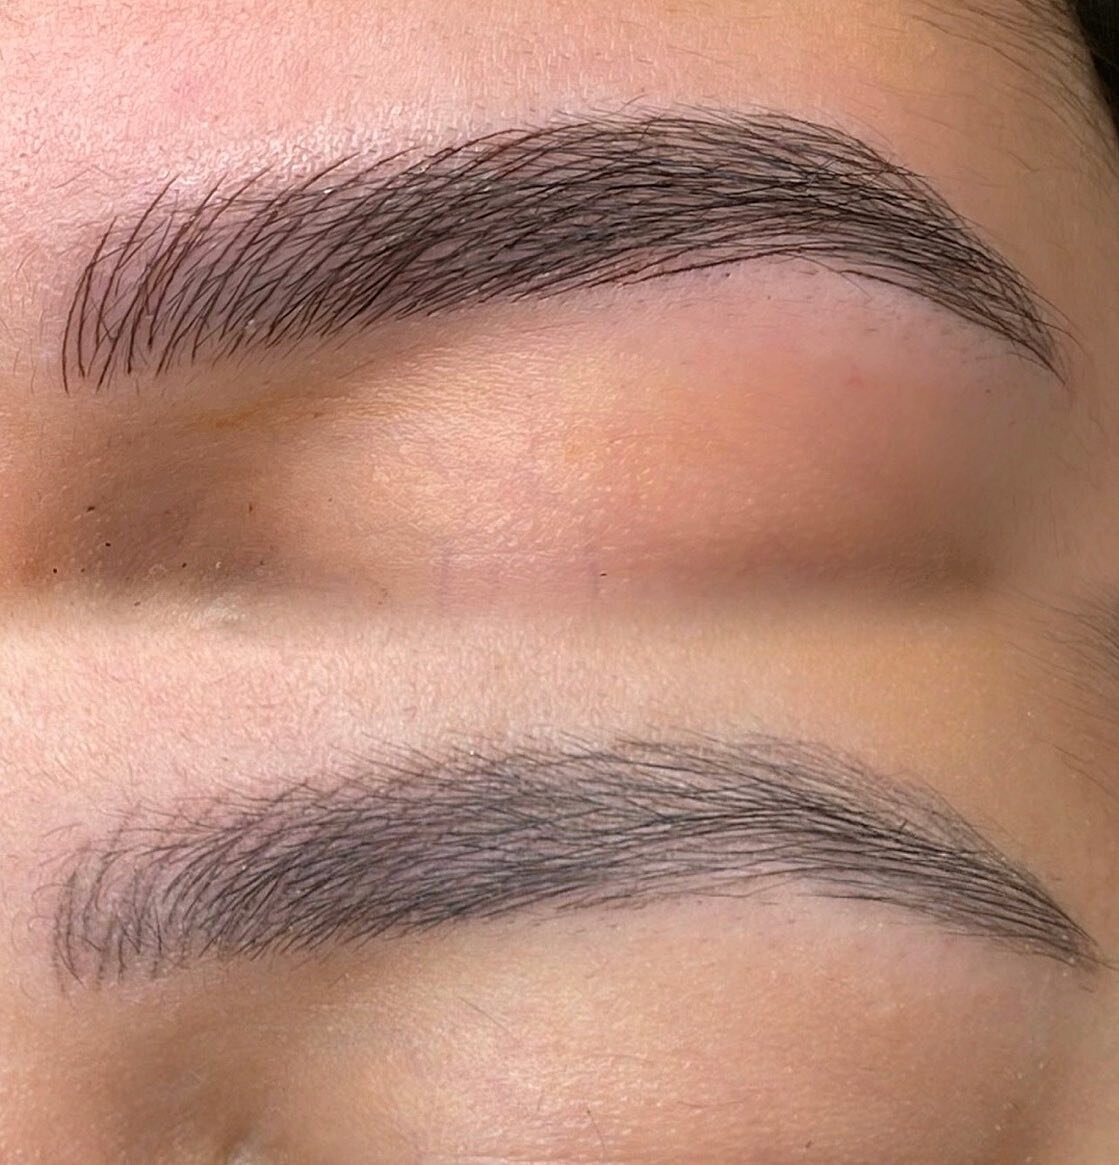 𝔉𝔯𝔢𝔰𝔥 ᵛᵉʳˢᵘˢ 𝔥𝔢𝔞𝔩𝔢𝔡 

What are the top components to get you healed #microblading results like this?

🅒🅞🅝🅣🅡🅐🅘🅝🅓🅘🅒🅐🅣🅘🅞🅝🅢
Read through the contraindications for this procedure thoroughly and reach out to your artist if any a